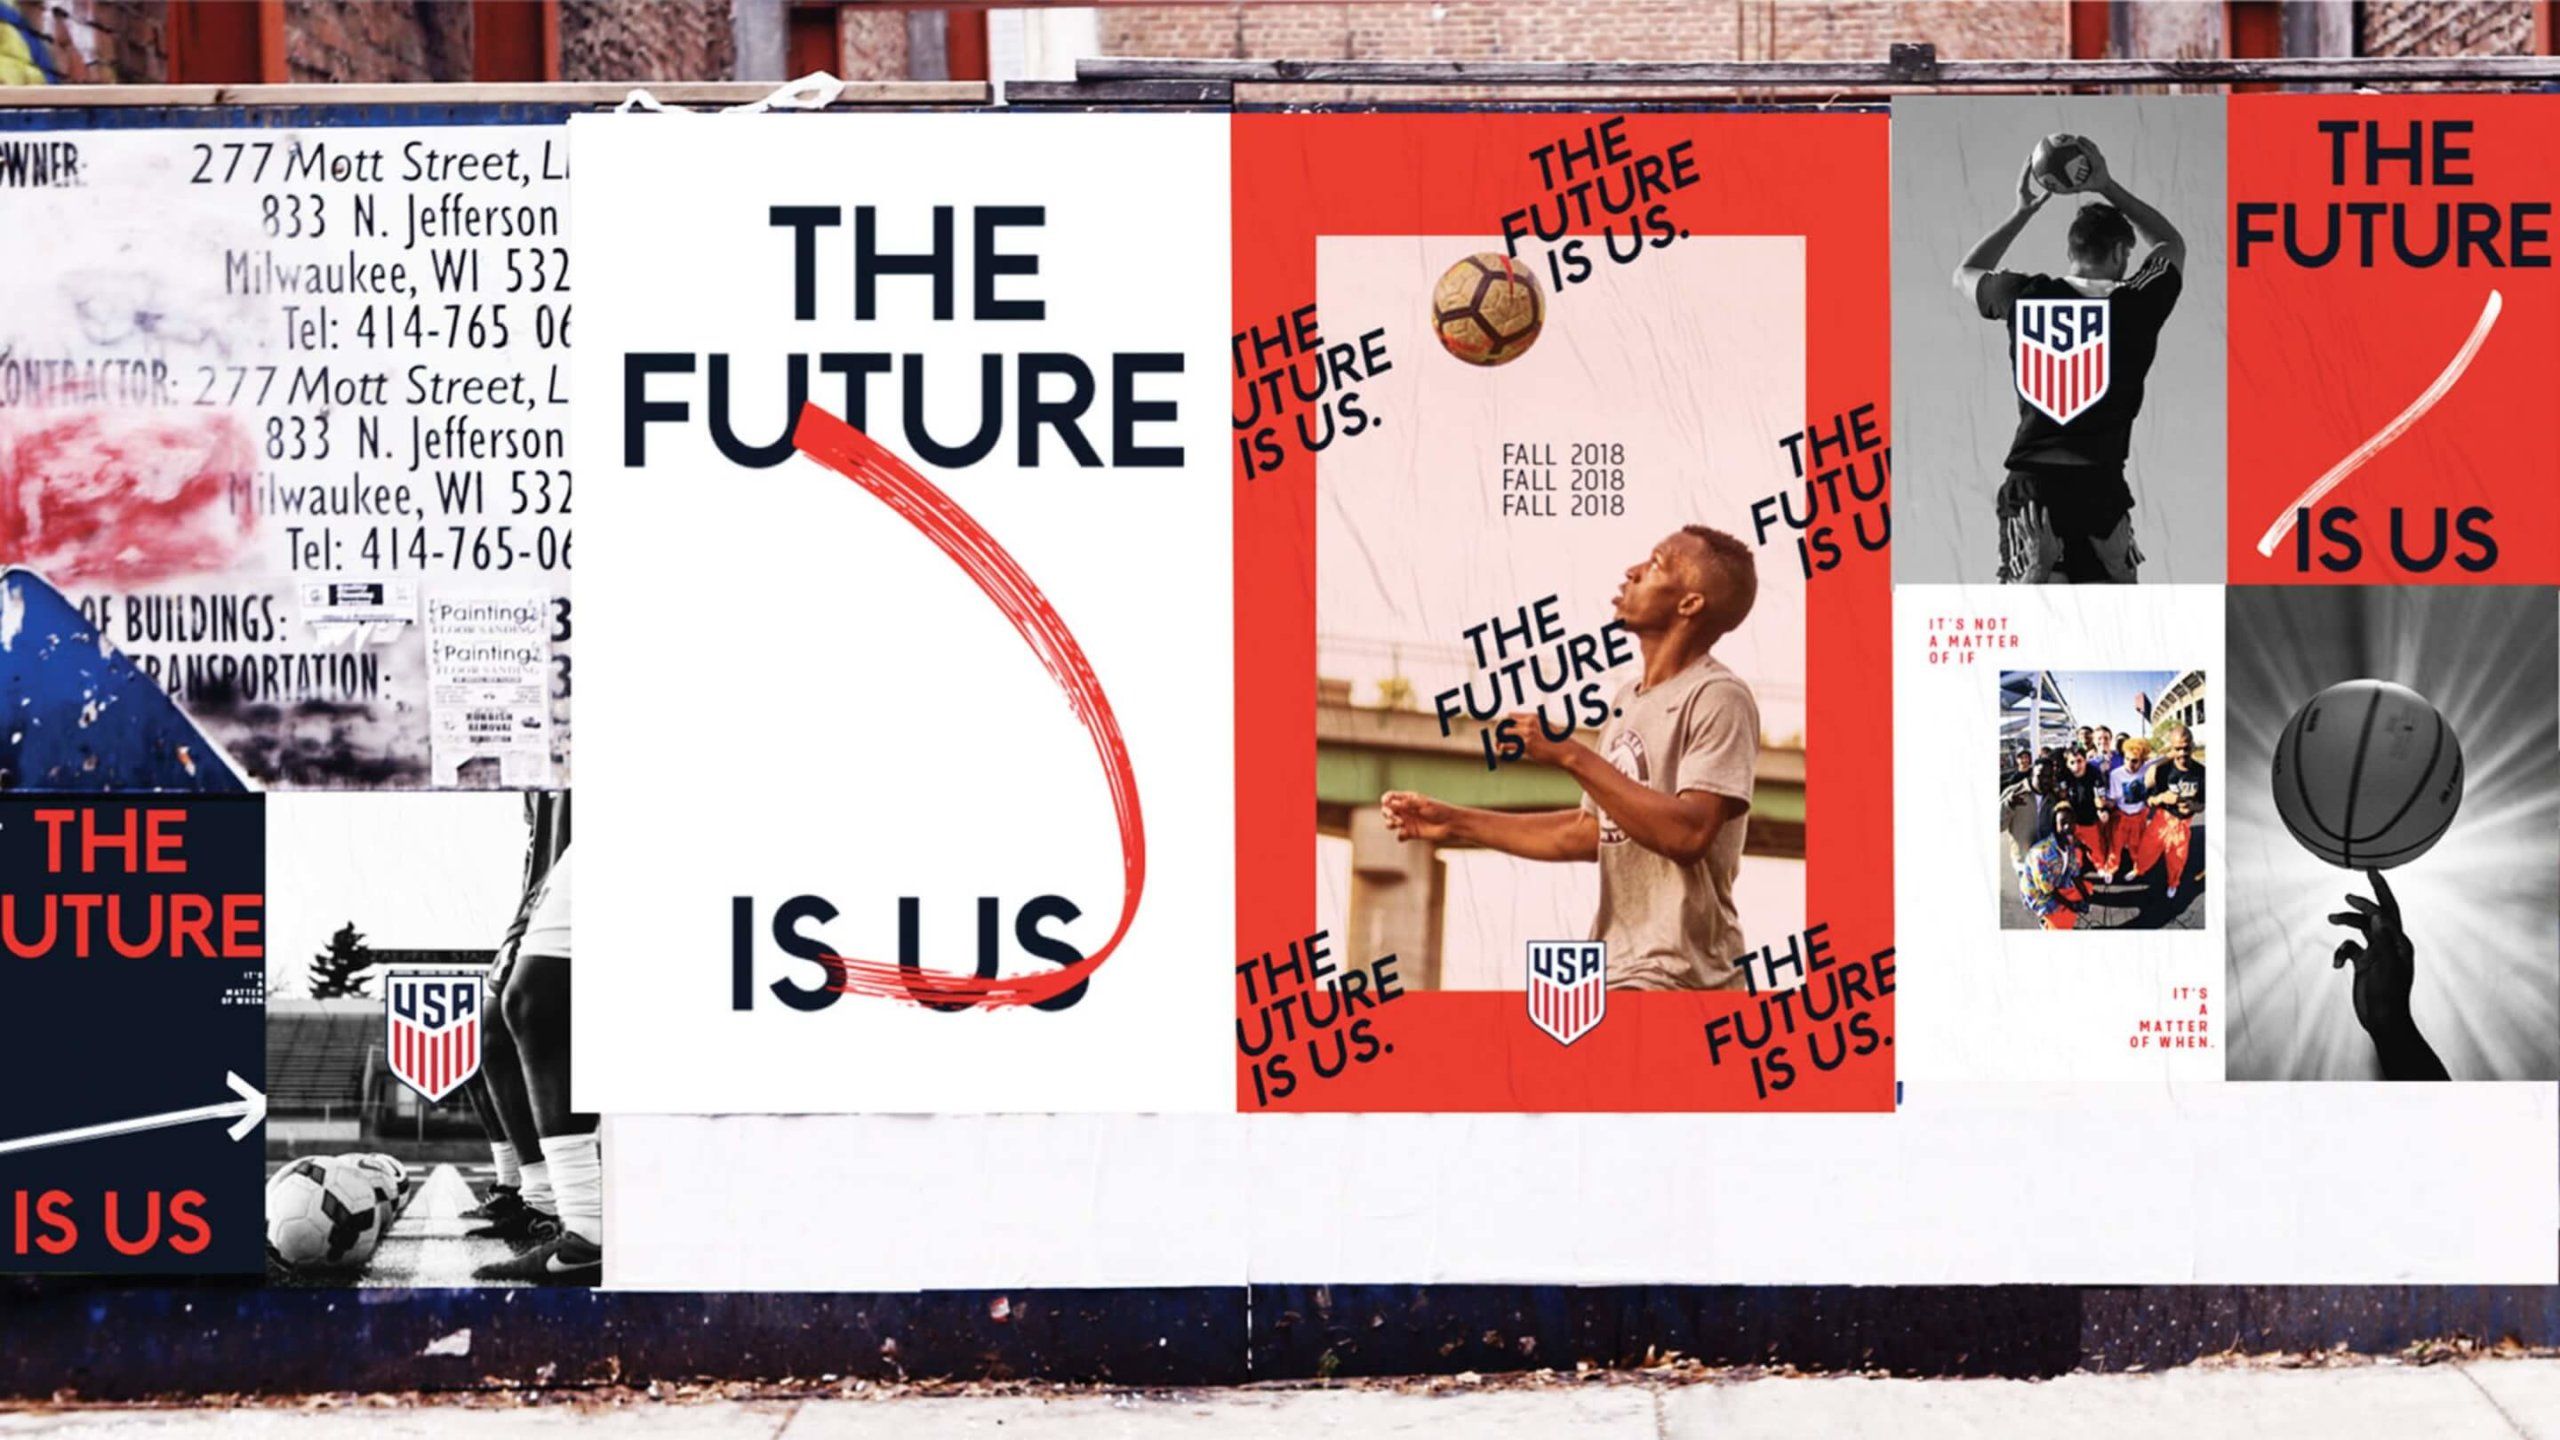 Billboard signage shows The Future is US campaign Fall 2018 Soccer and Basketball